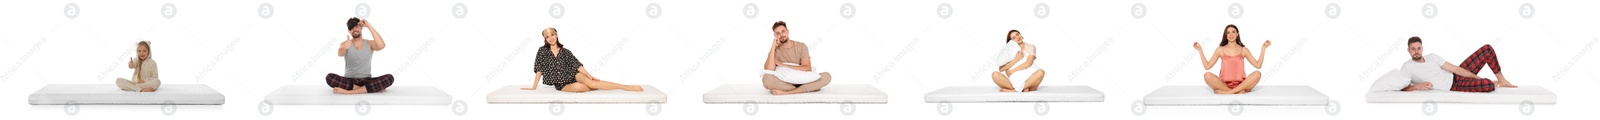 Image of Collage with photos of people on soft comfortable mattresses on white background. Banner design